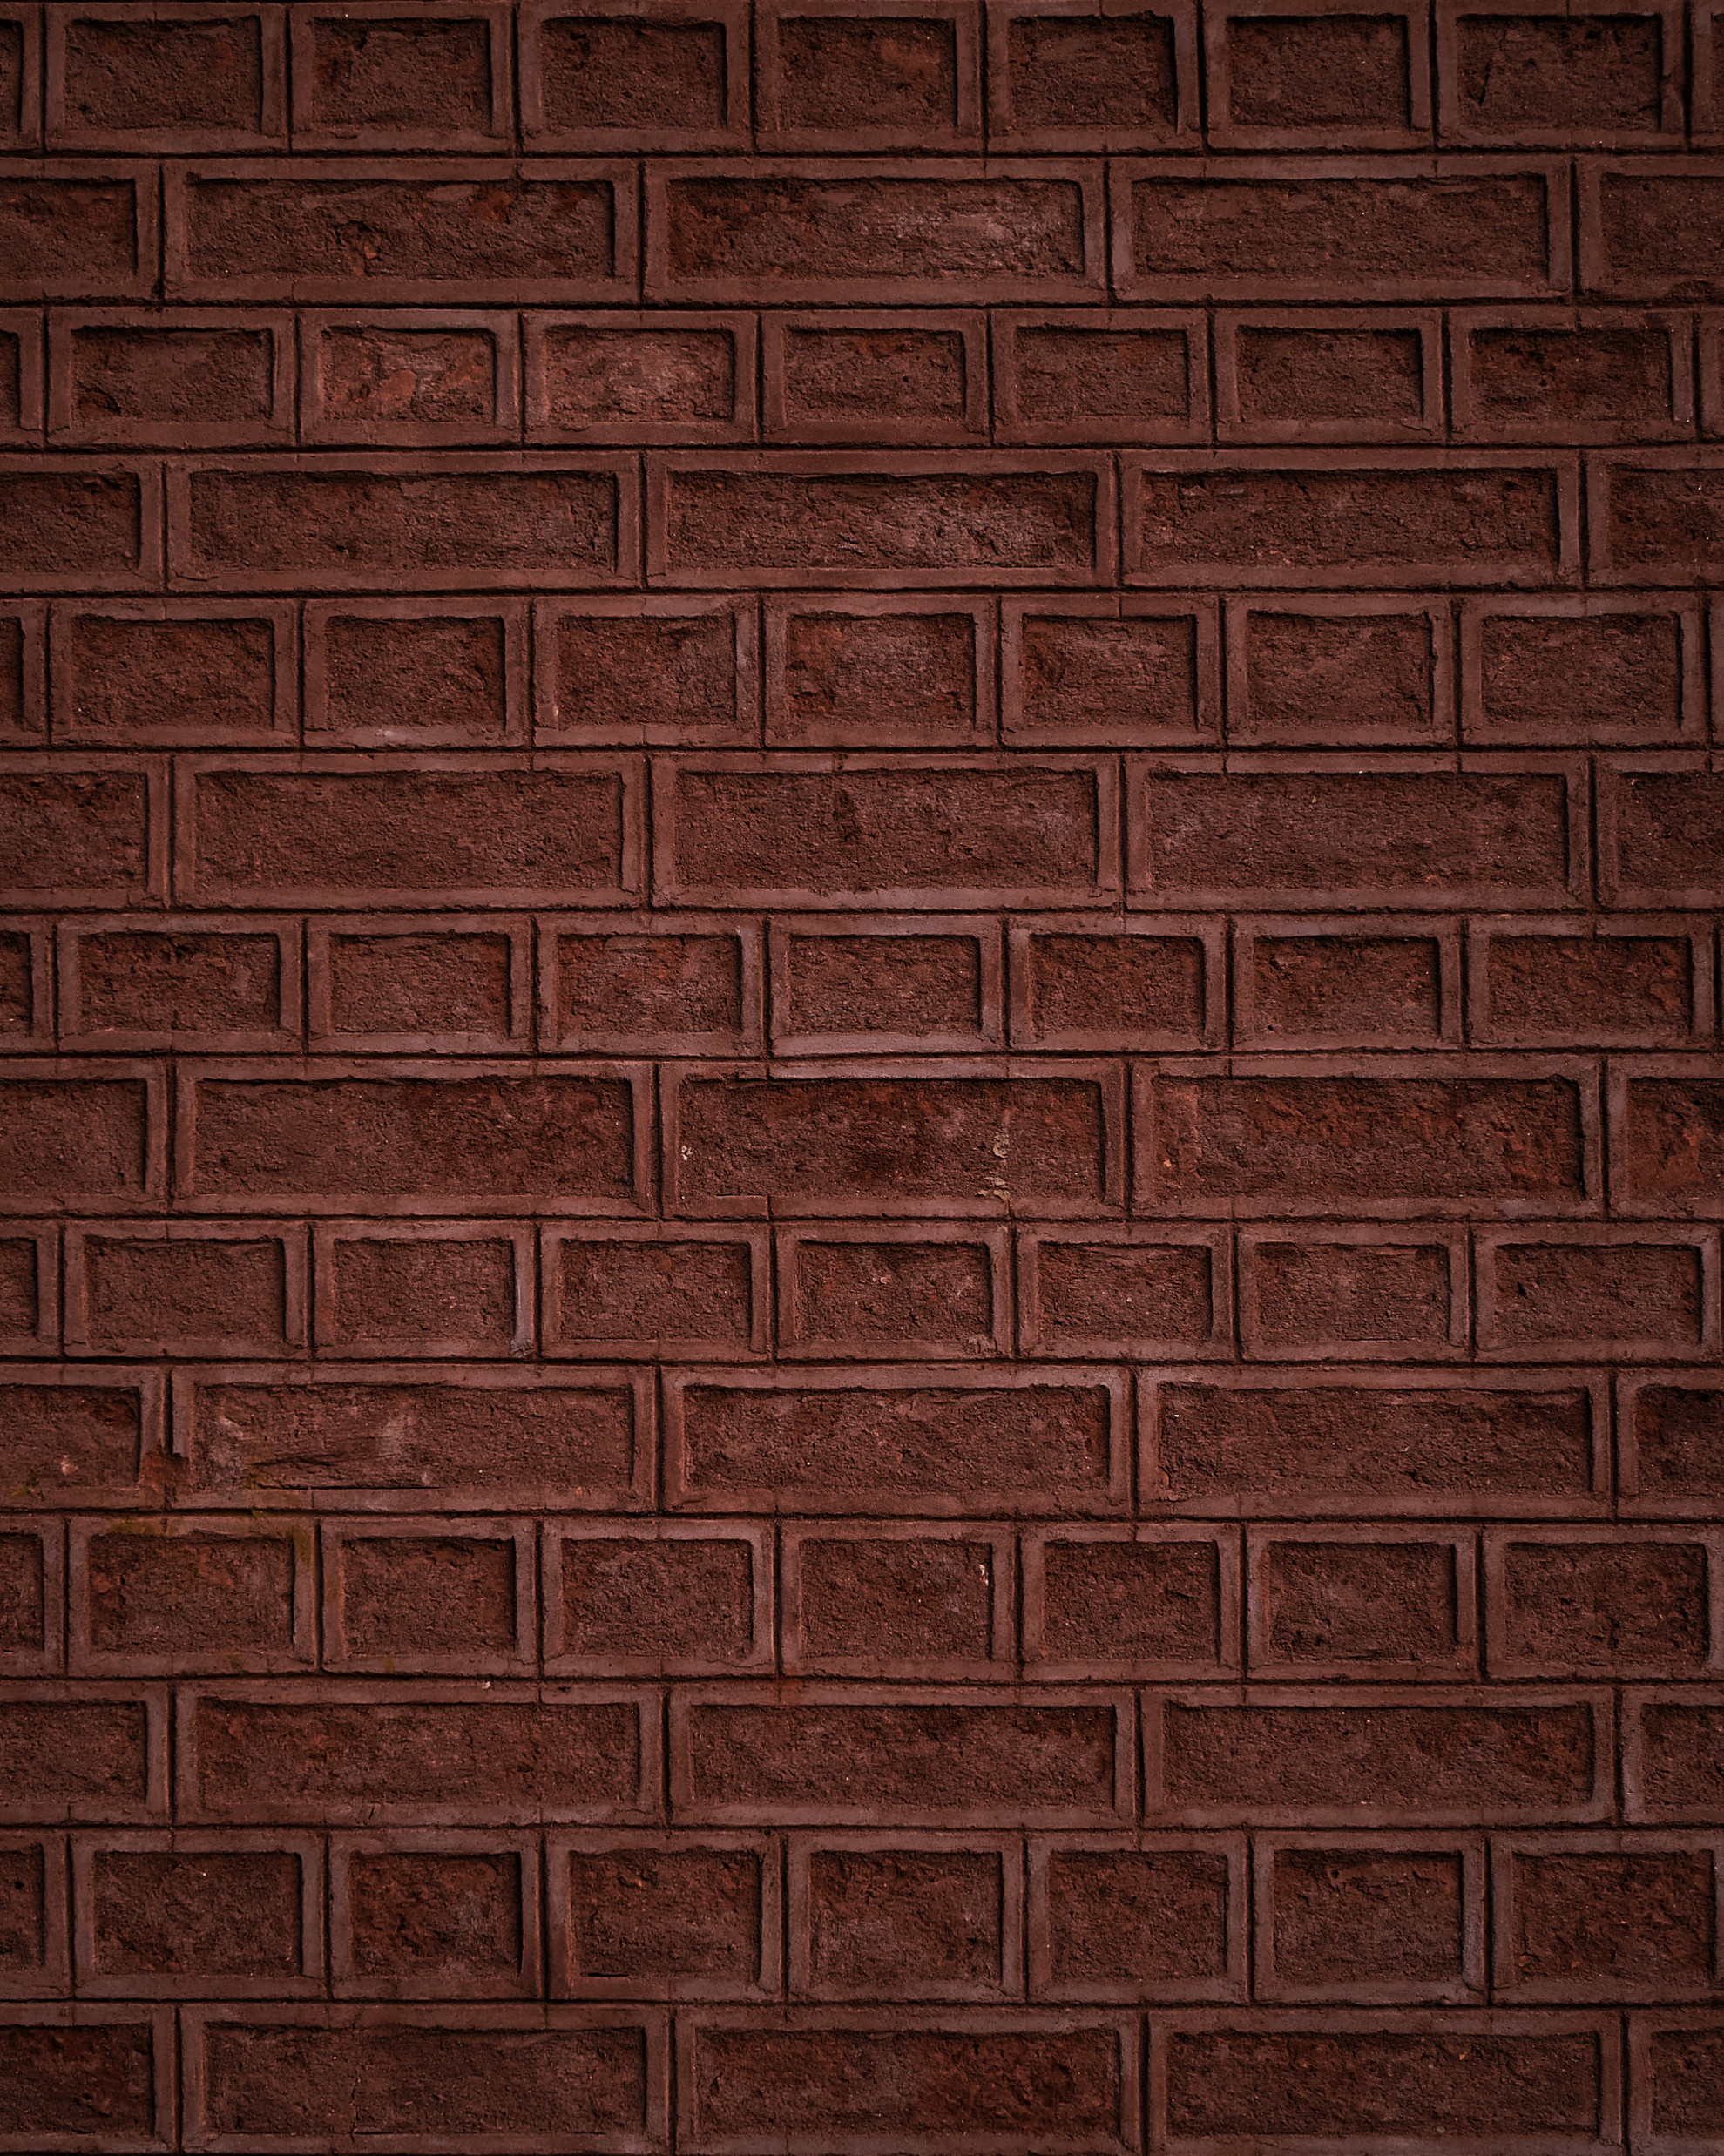 Free photo The brick wall is red in color